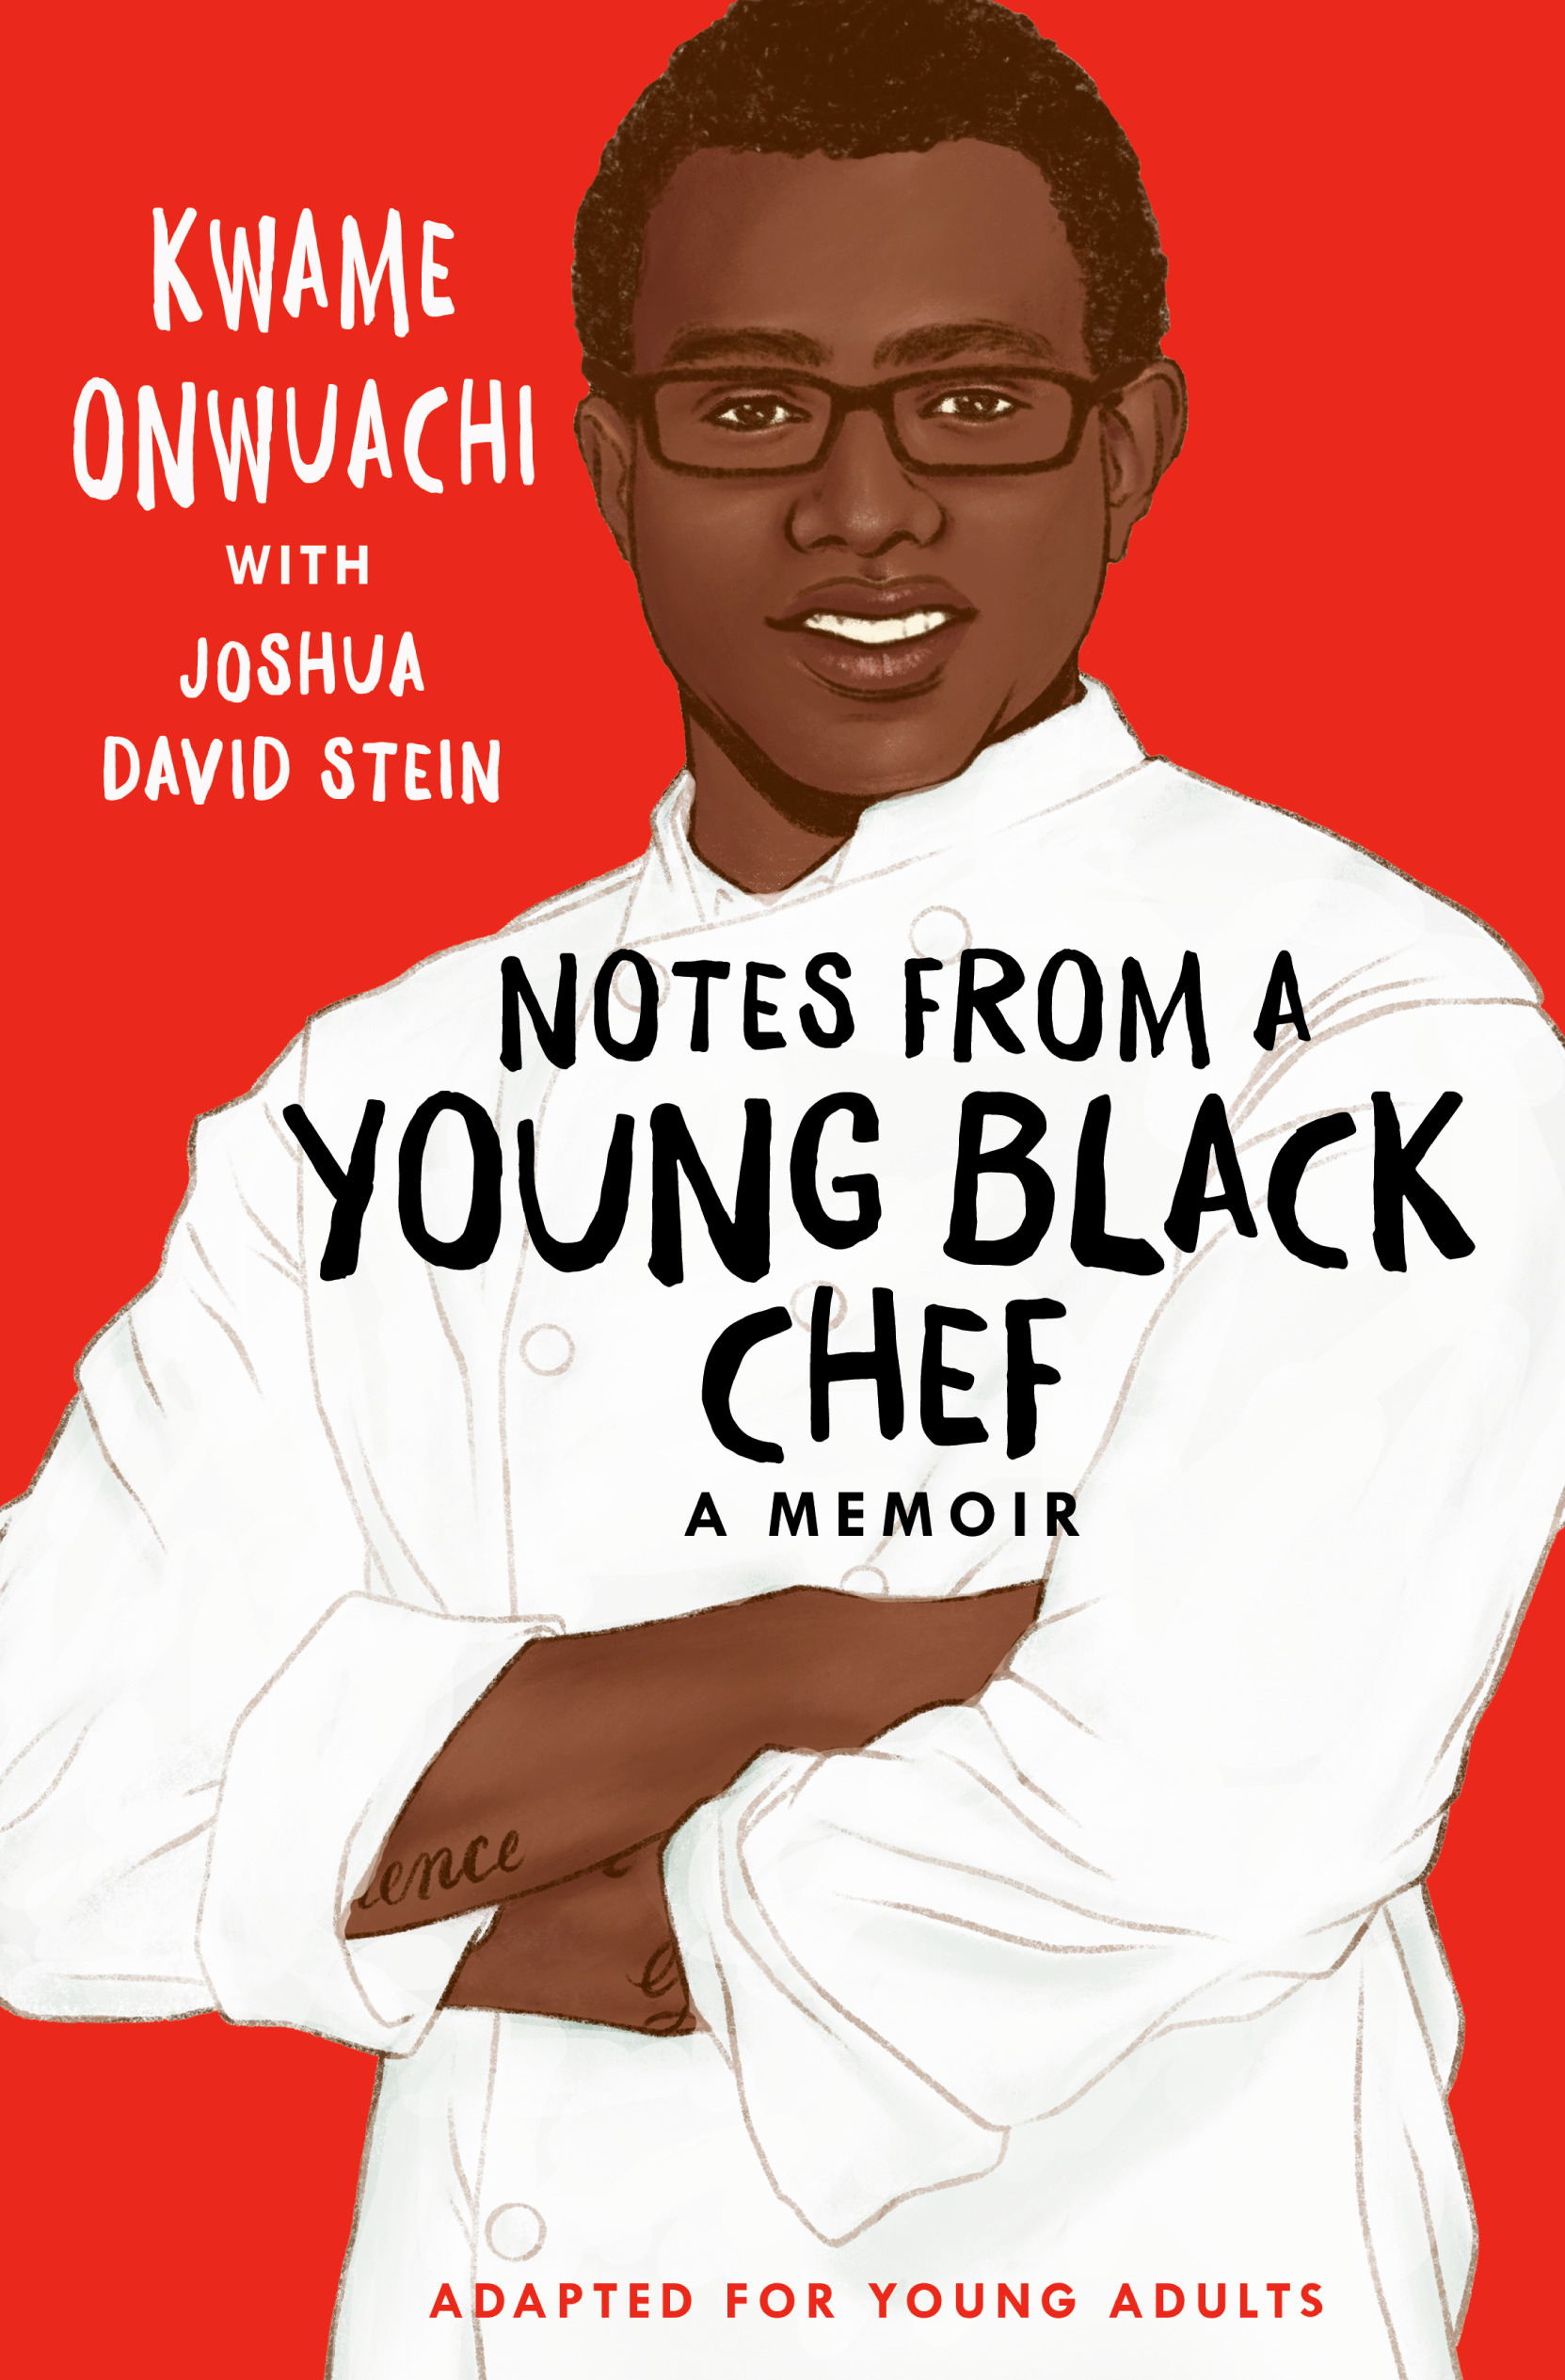 Notes from a Young Black Chef (Adapted for Young Adults) | Onwuachi, Kwame